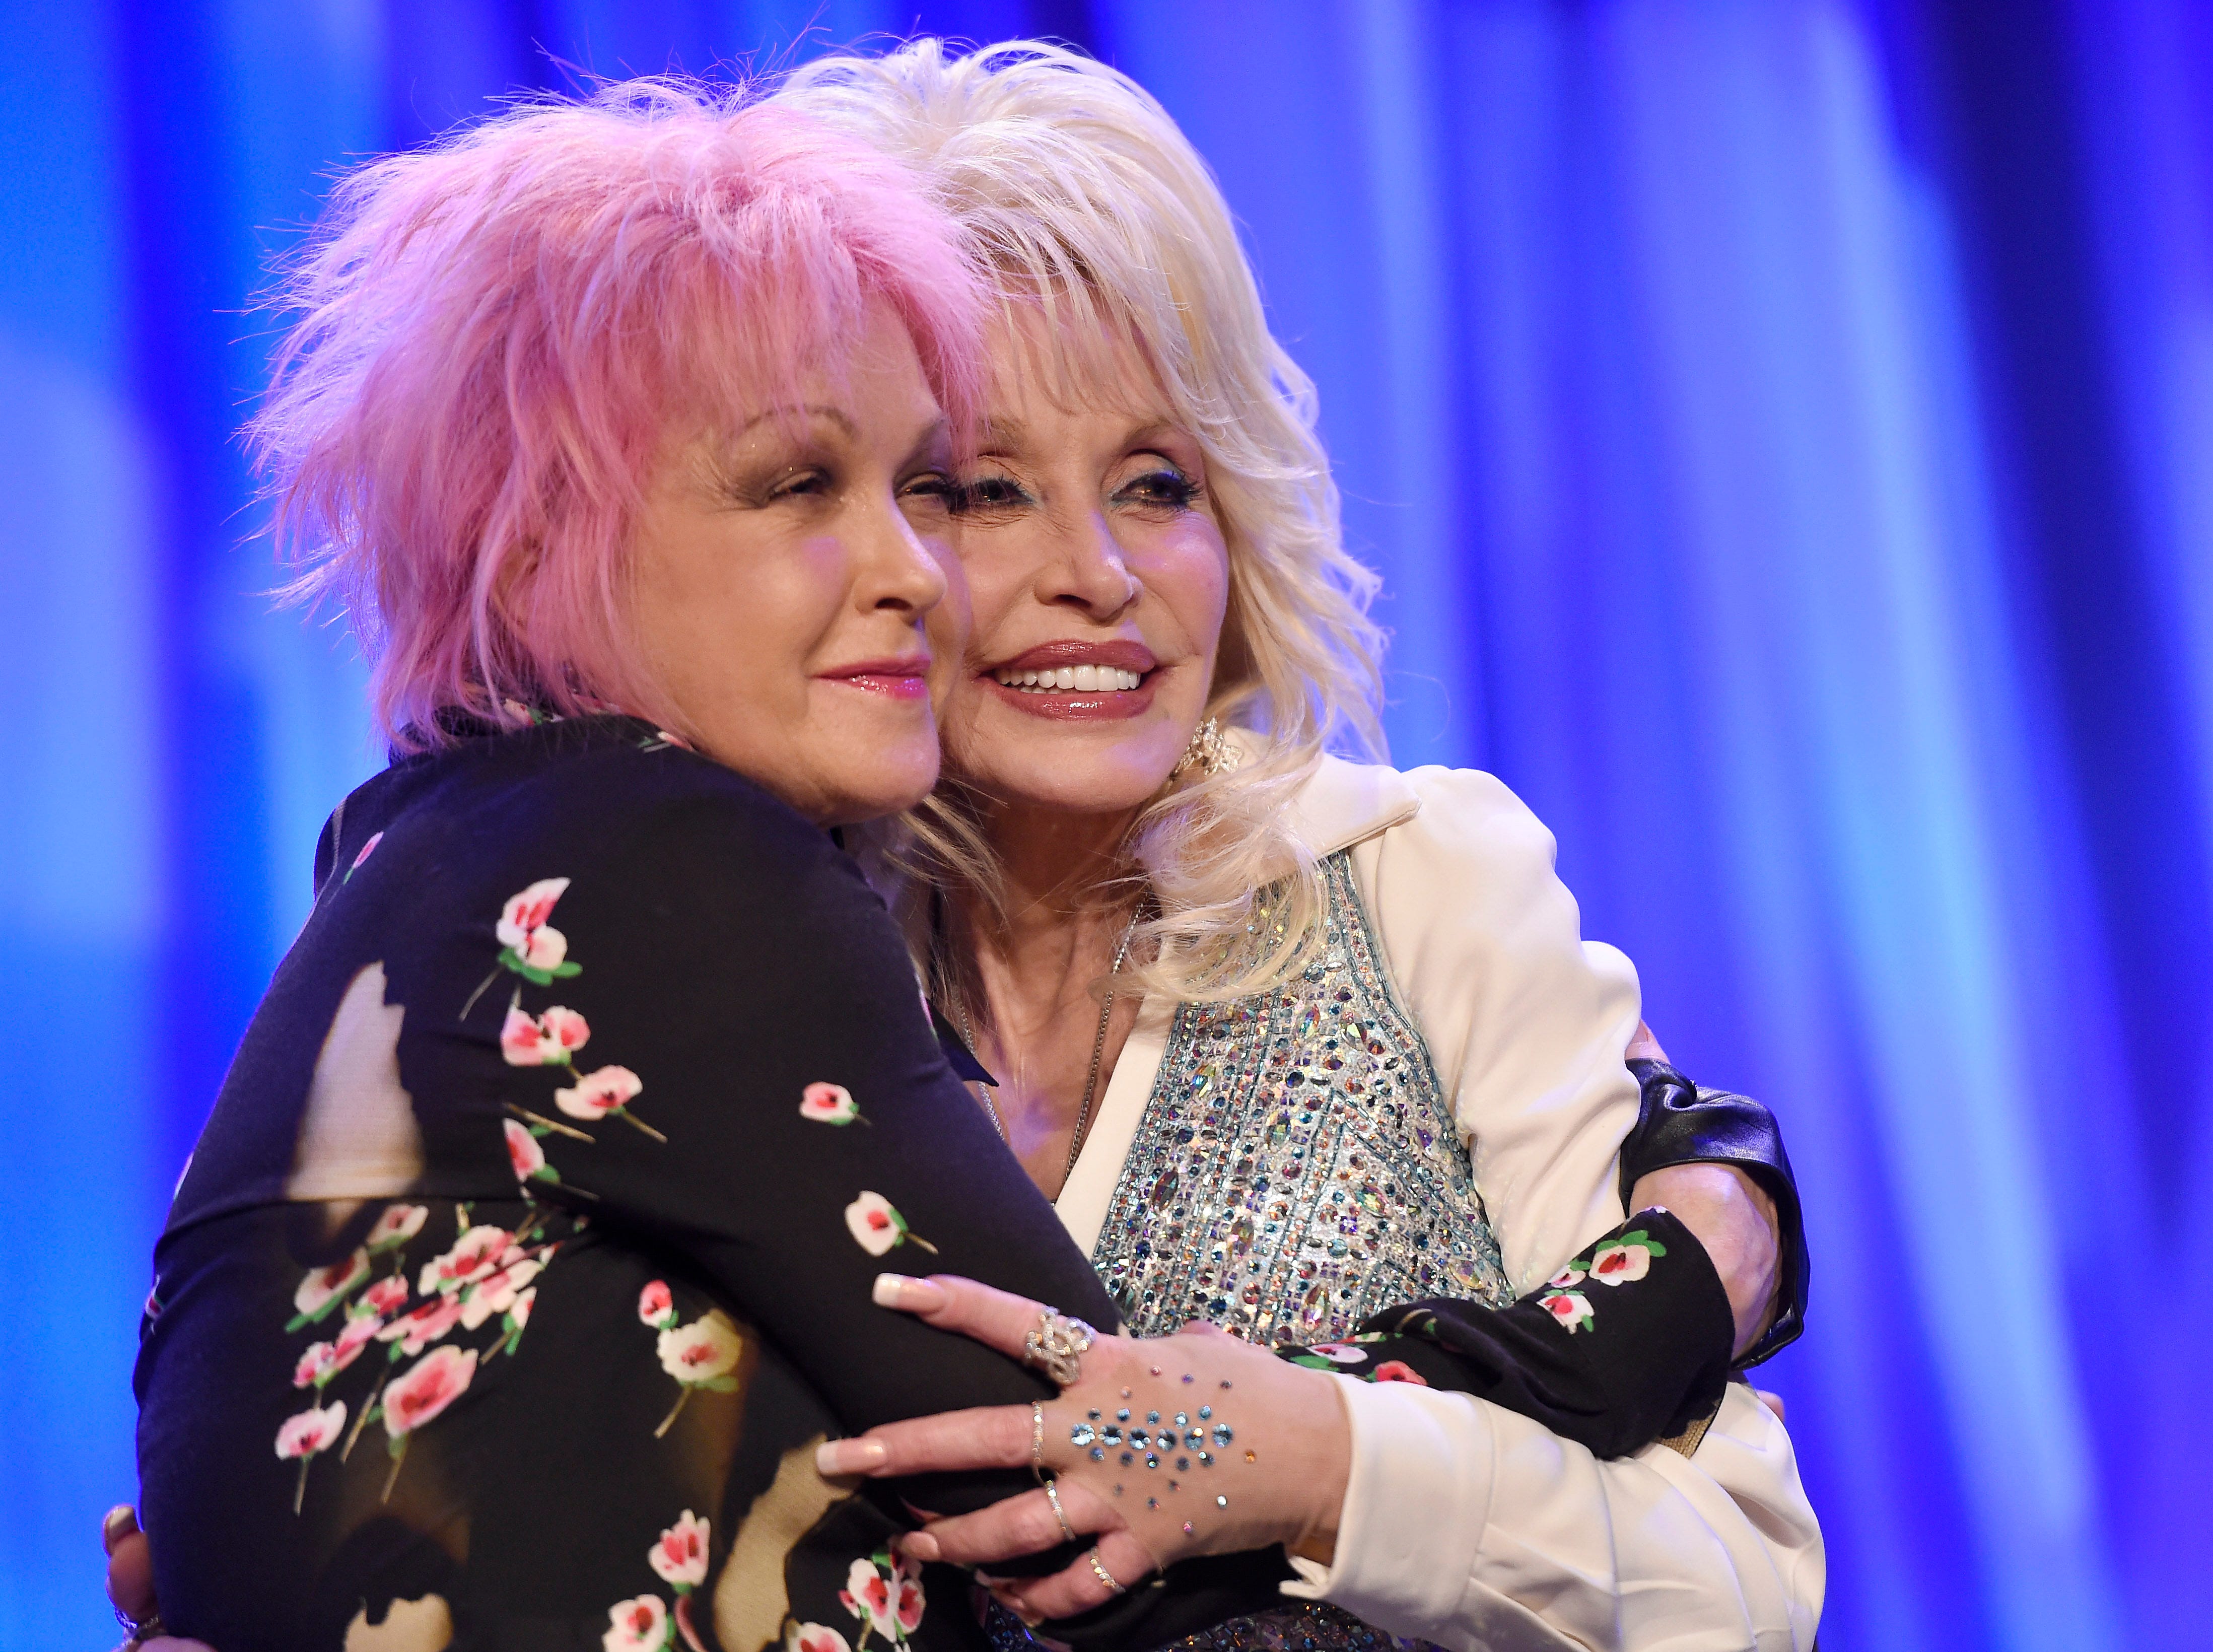 Dolly Parton, Belinda Carlisle, Cyndi Lauper, more legends team up for '80 for Brady' song